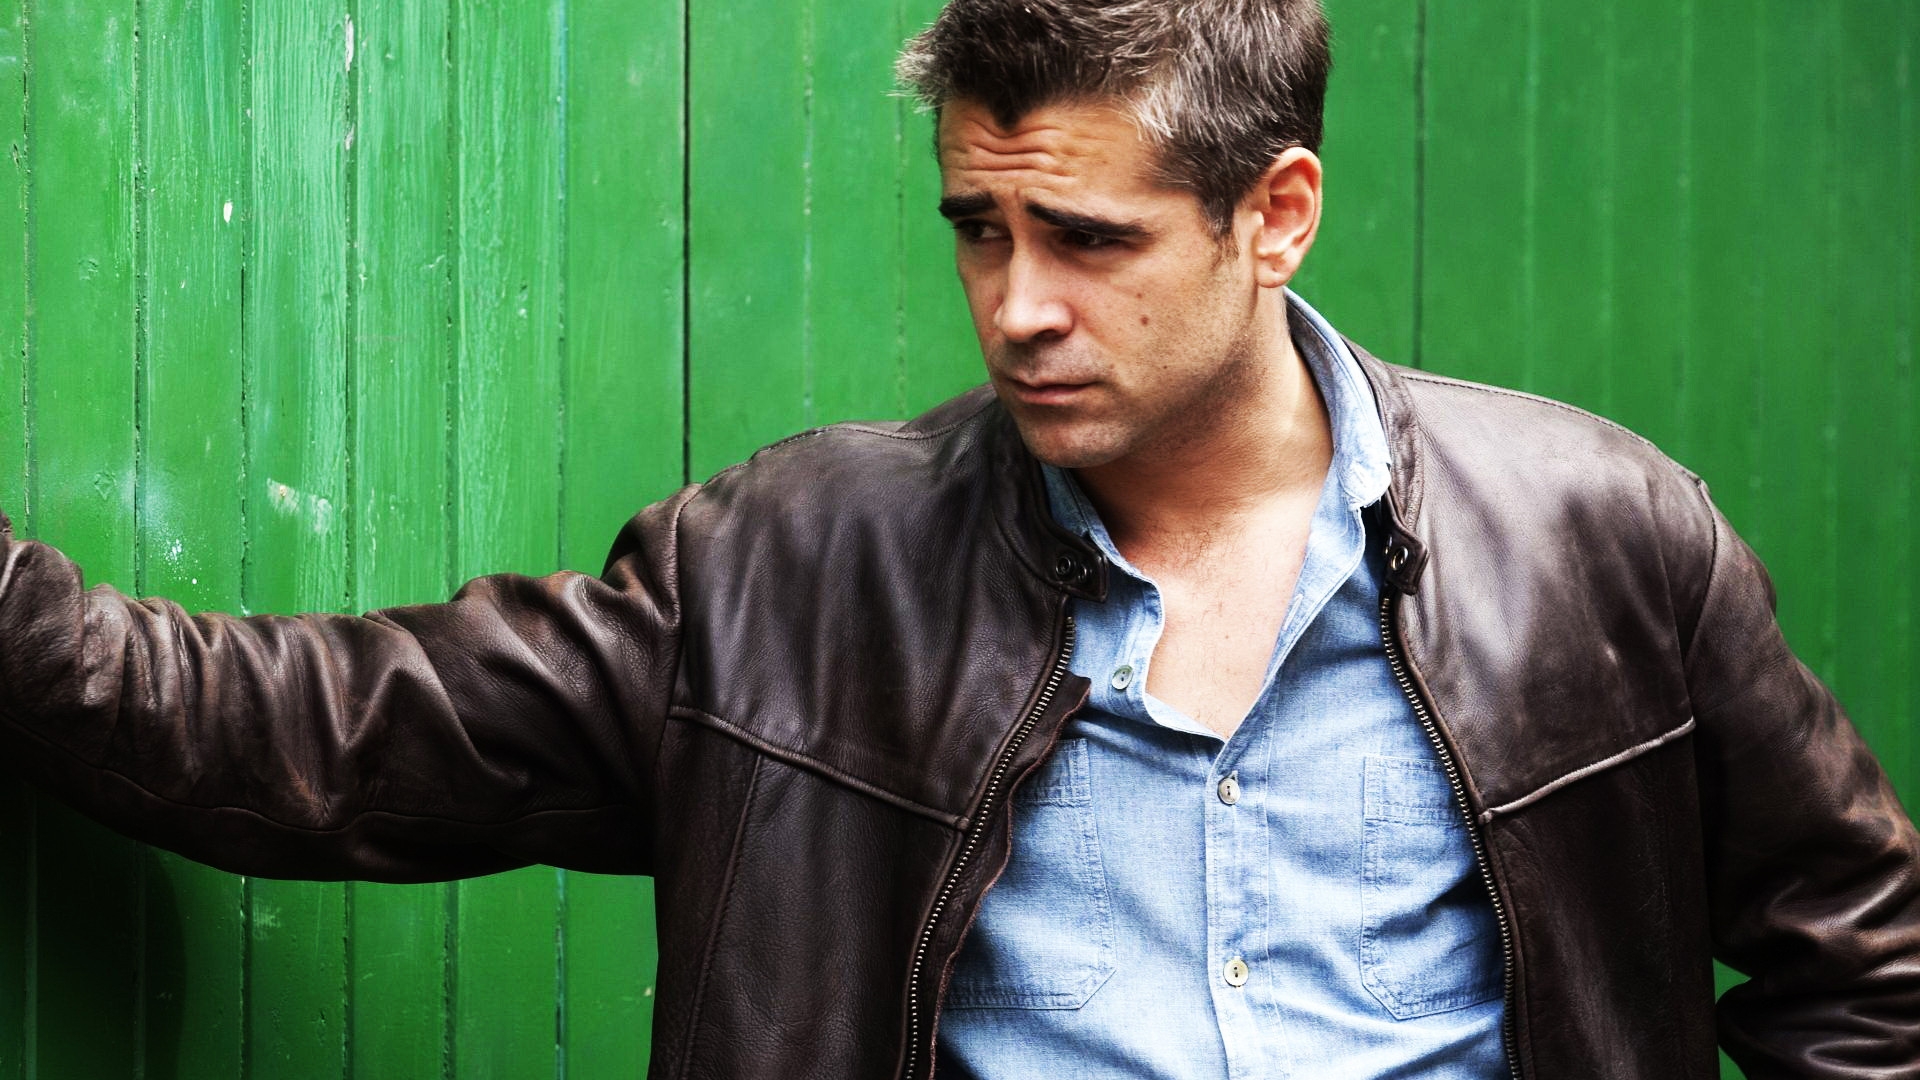 Colin Farrell Actor for 1920 x 1080 HDTV 1080p resolution